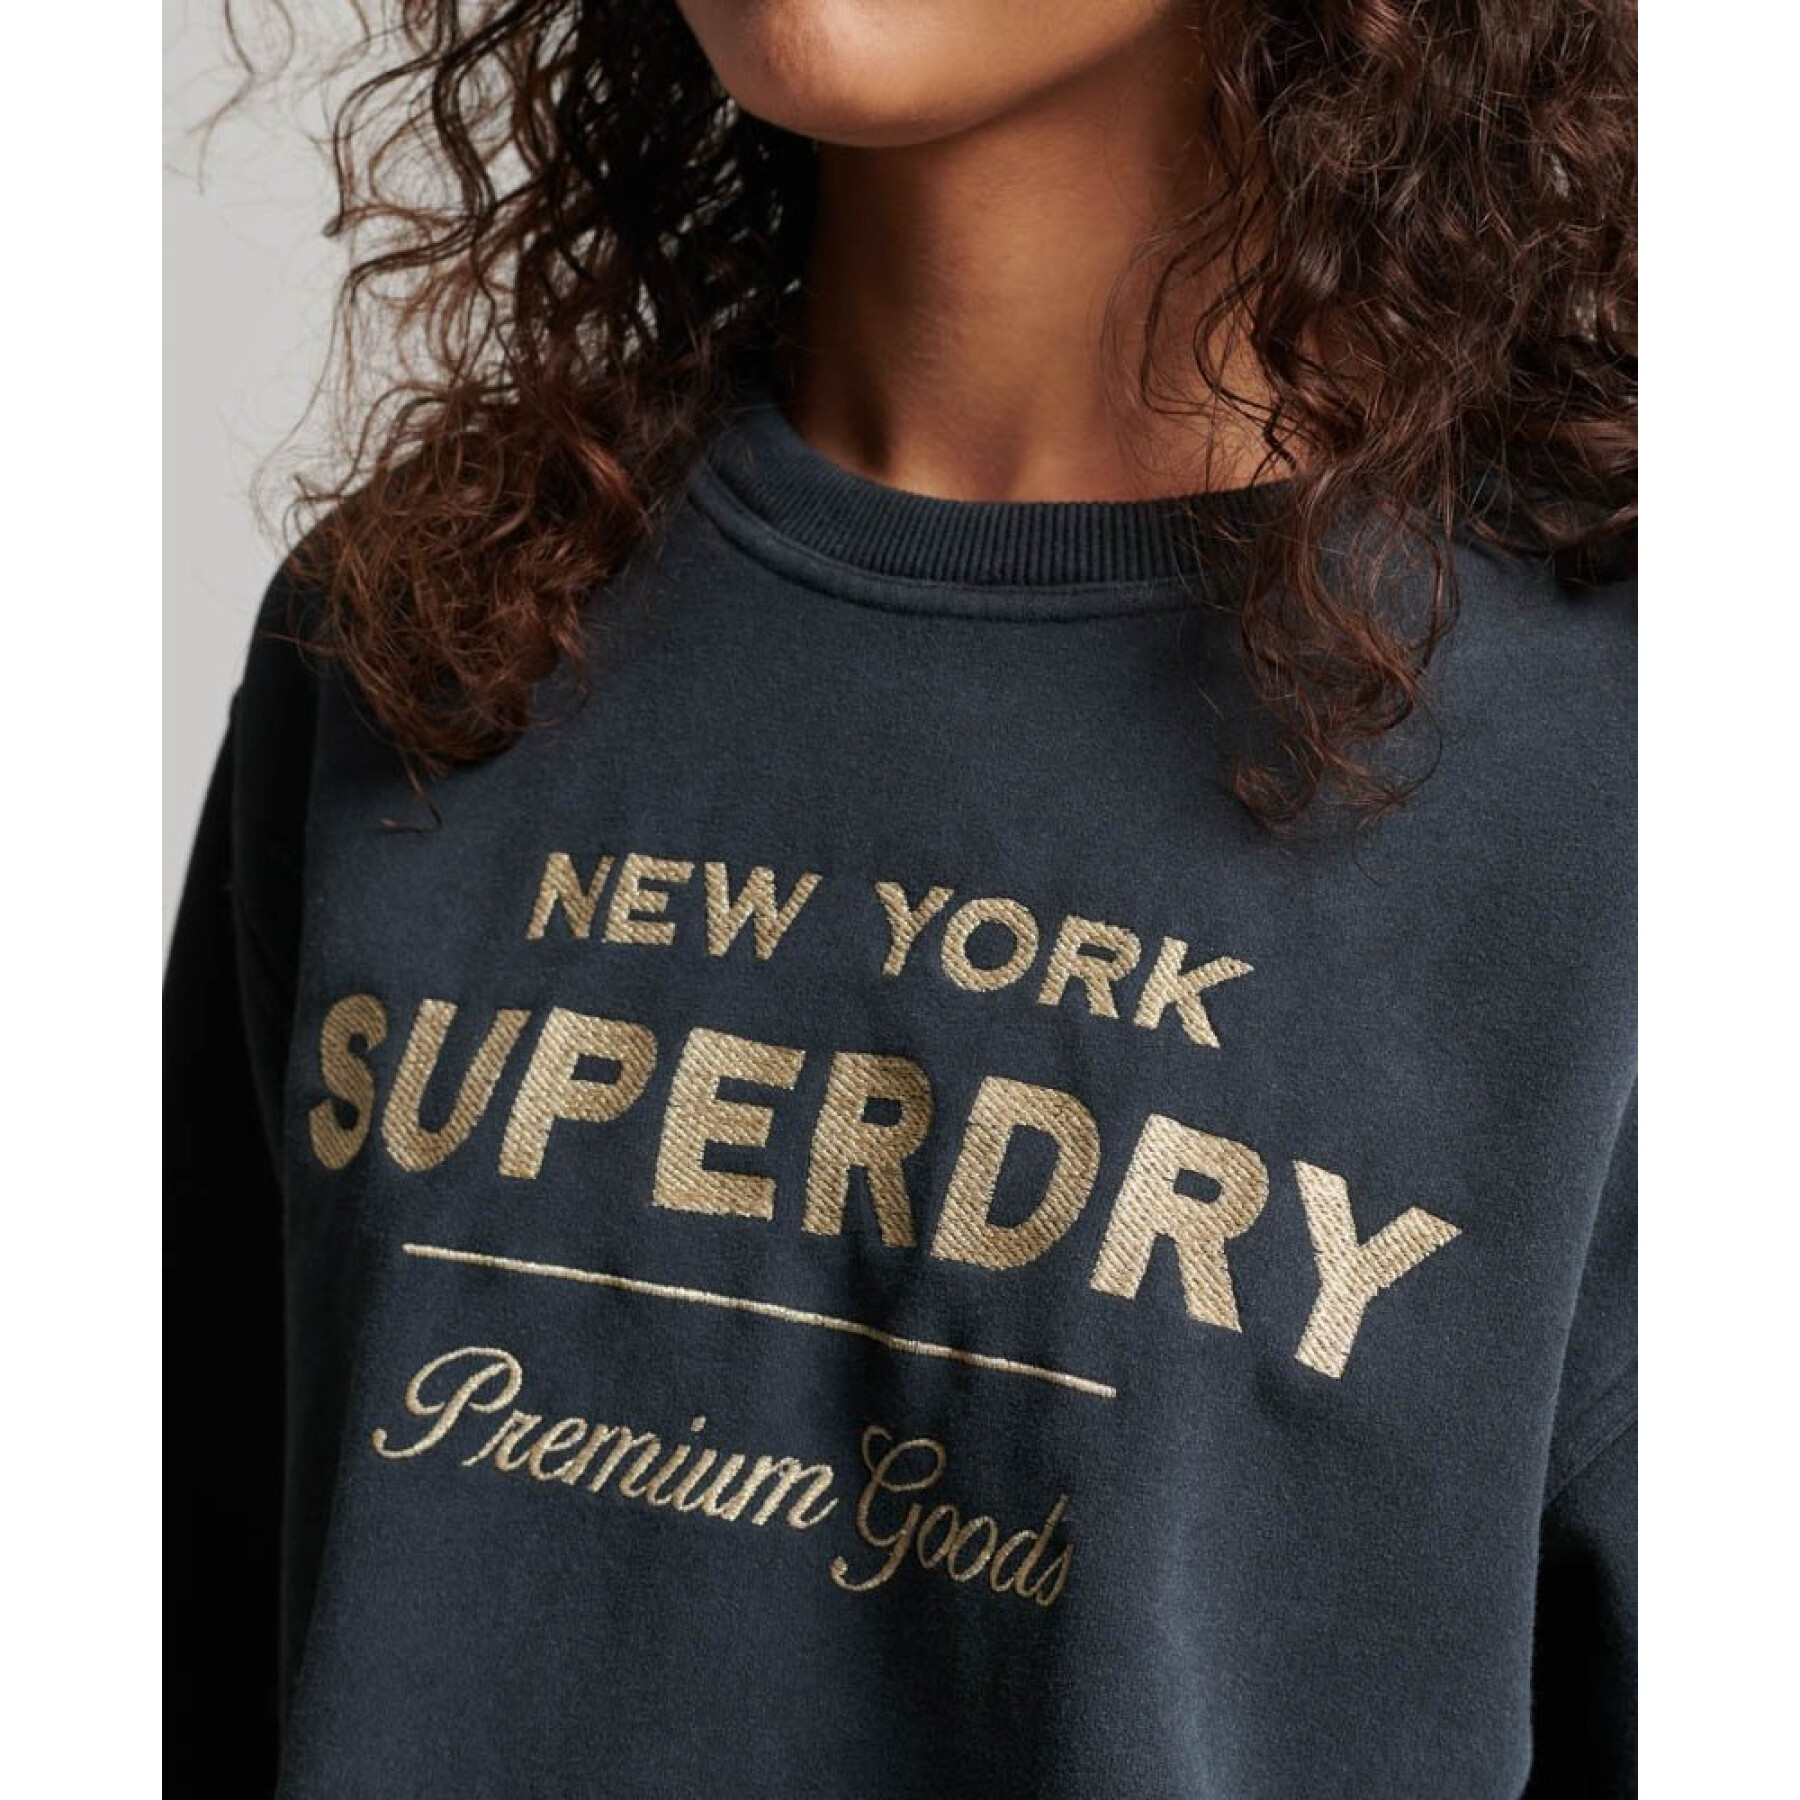 Camisola para mulher Superdry Luxe Metallic